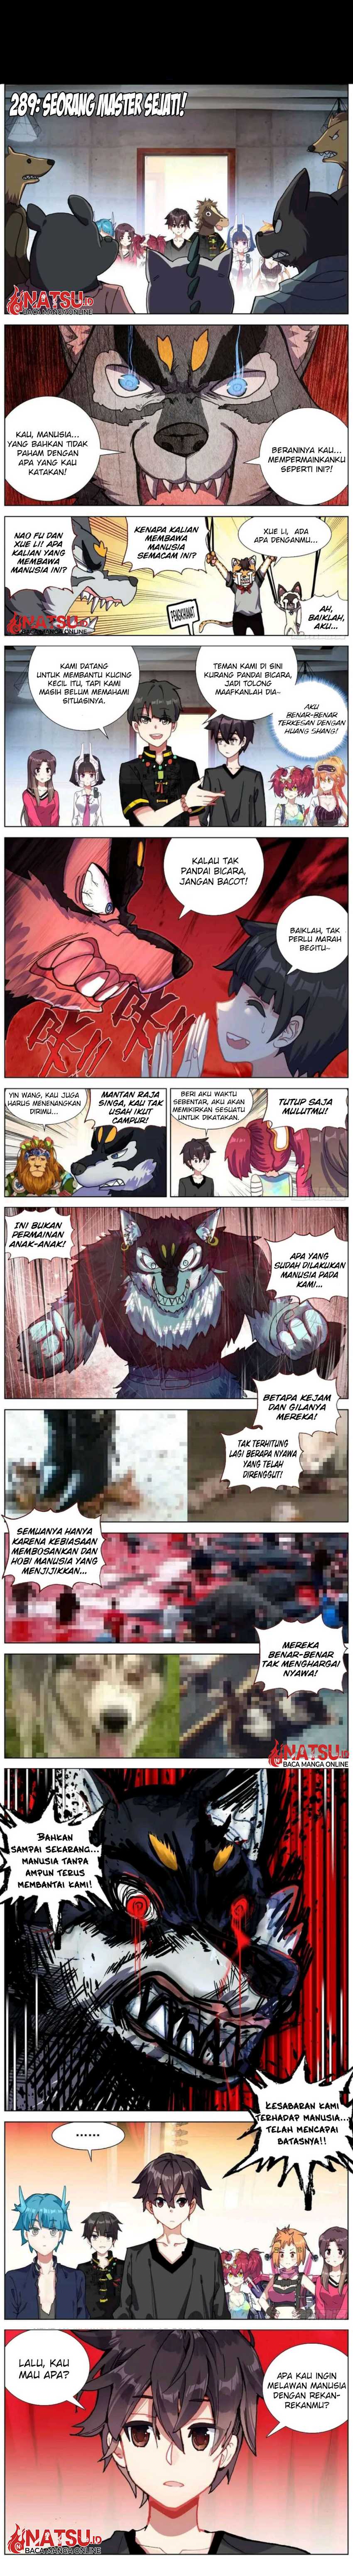 Different Kings Chapter 289 - 33